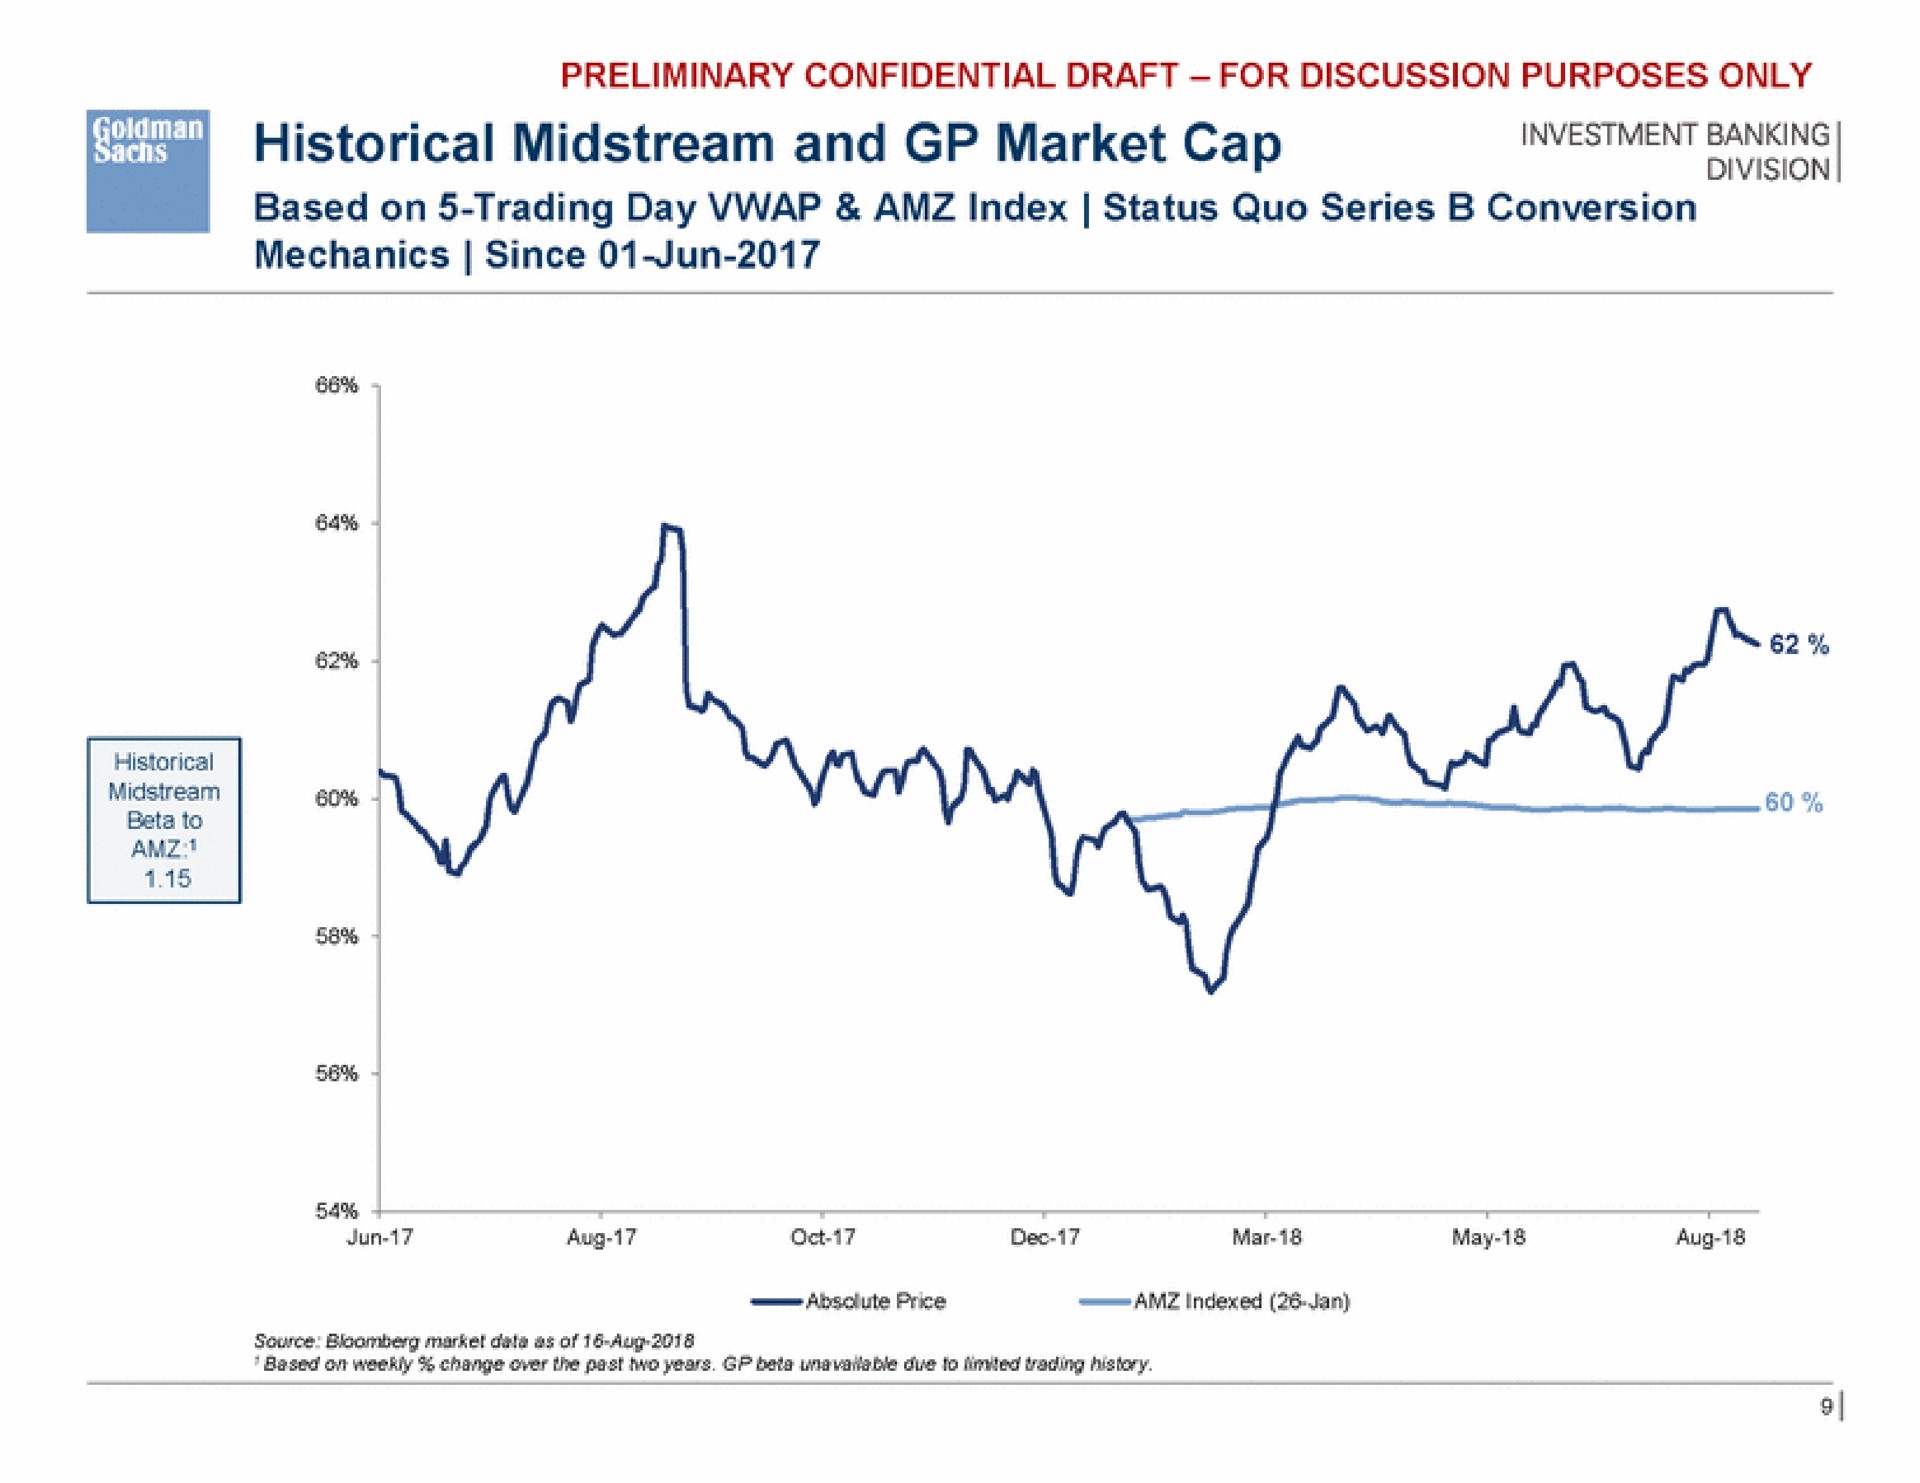 see historical midstream and market cap | Goldman Sachs